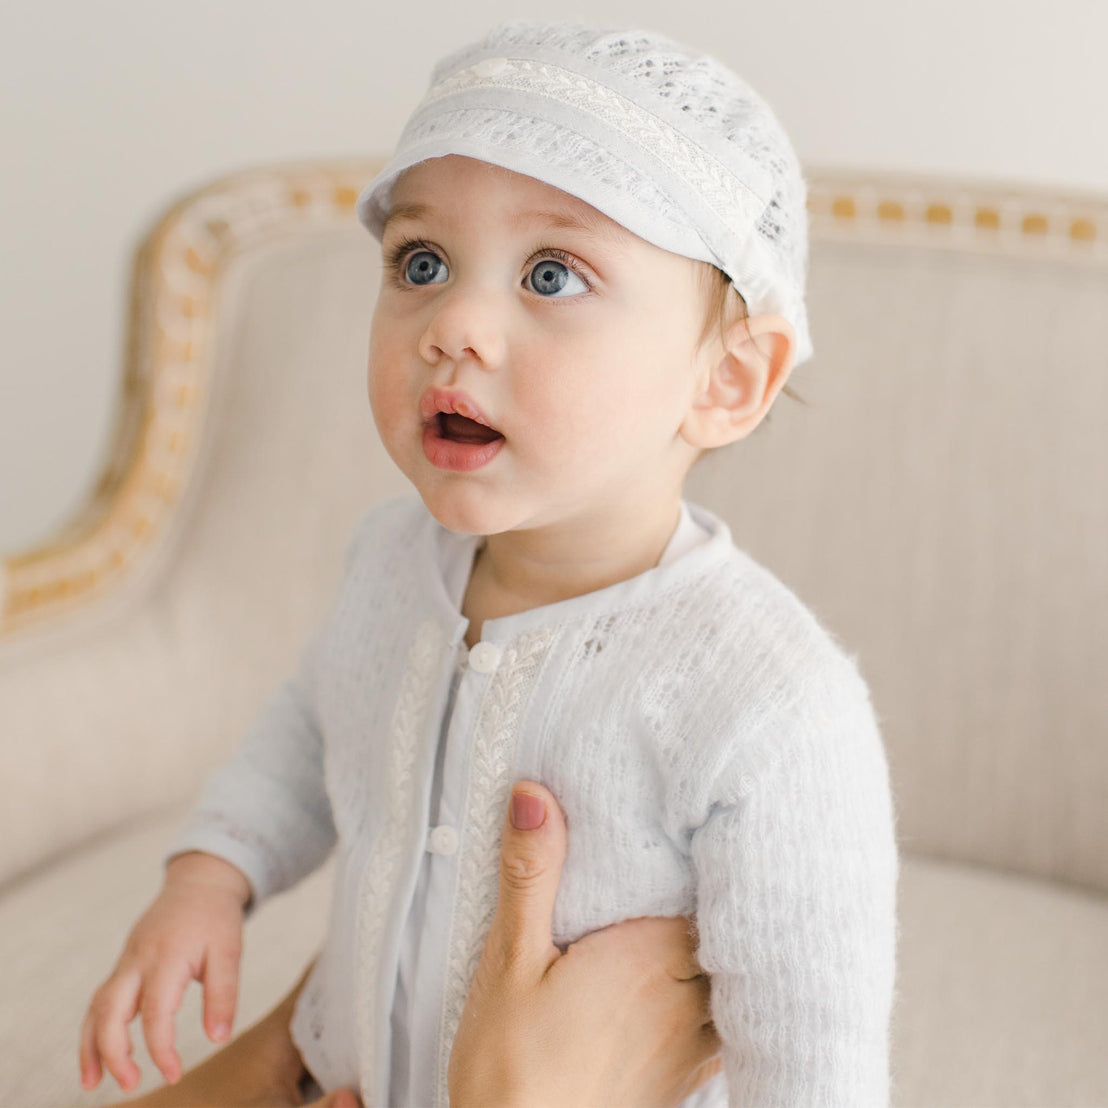 A baby boy wearing the Harrison Blue Knit Sweater and matching hat made from soft knit fabric and detailed with soft blue linen/cotton blend edging and ivory Venice lace